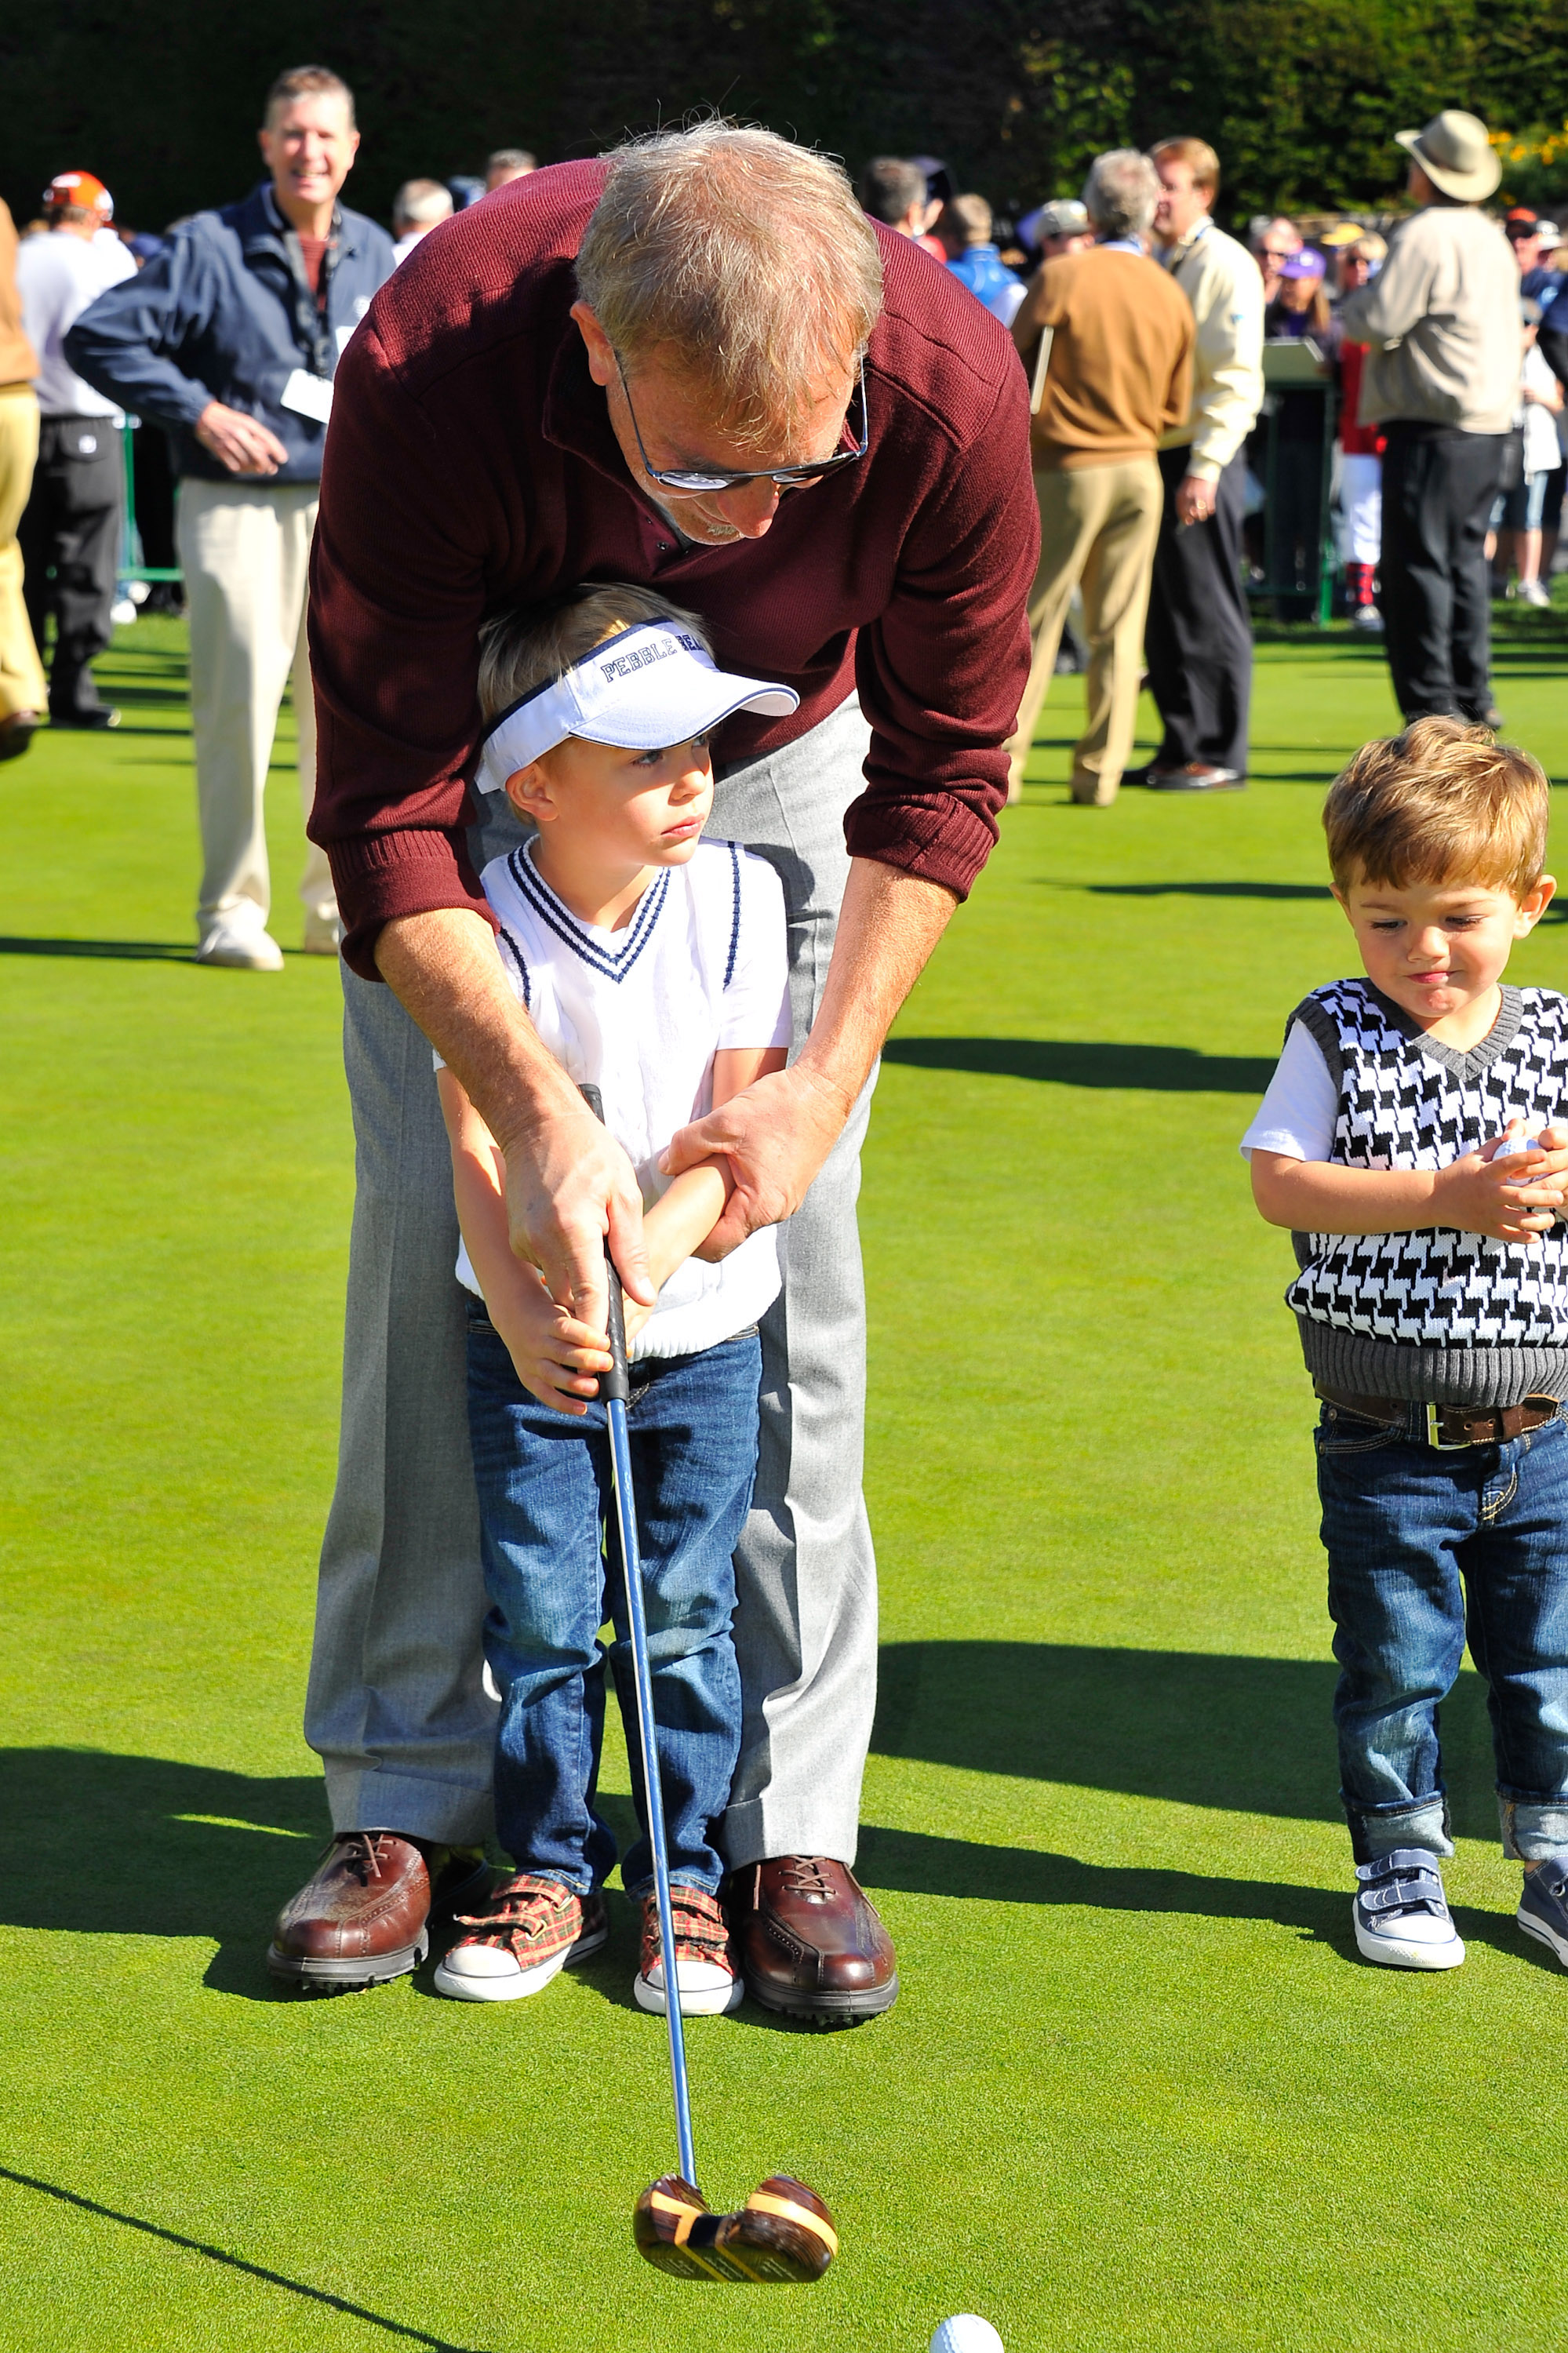 Kevin Costner plays golf with his sons at the AT&T Pebble Beach National Pro-Am at Pebble Beach Golf Links | Source: Getty Images